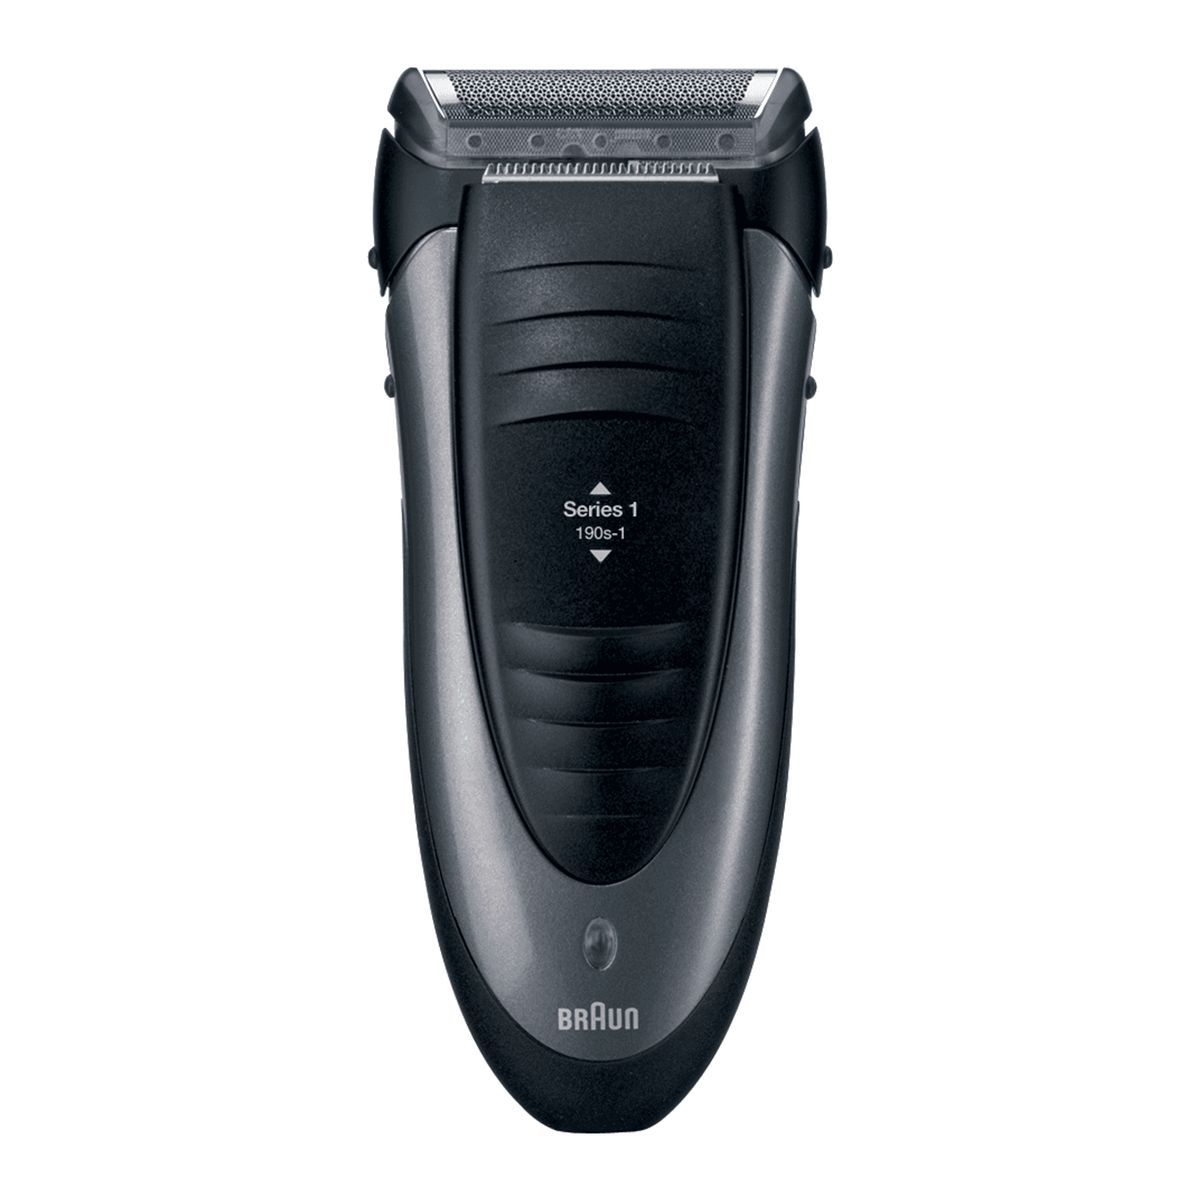 Braun Series 1 shaver men, electric shaver with long hair trimmer, rechargeable and cordless electric shaver, 30 min run time, 190s, black